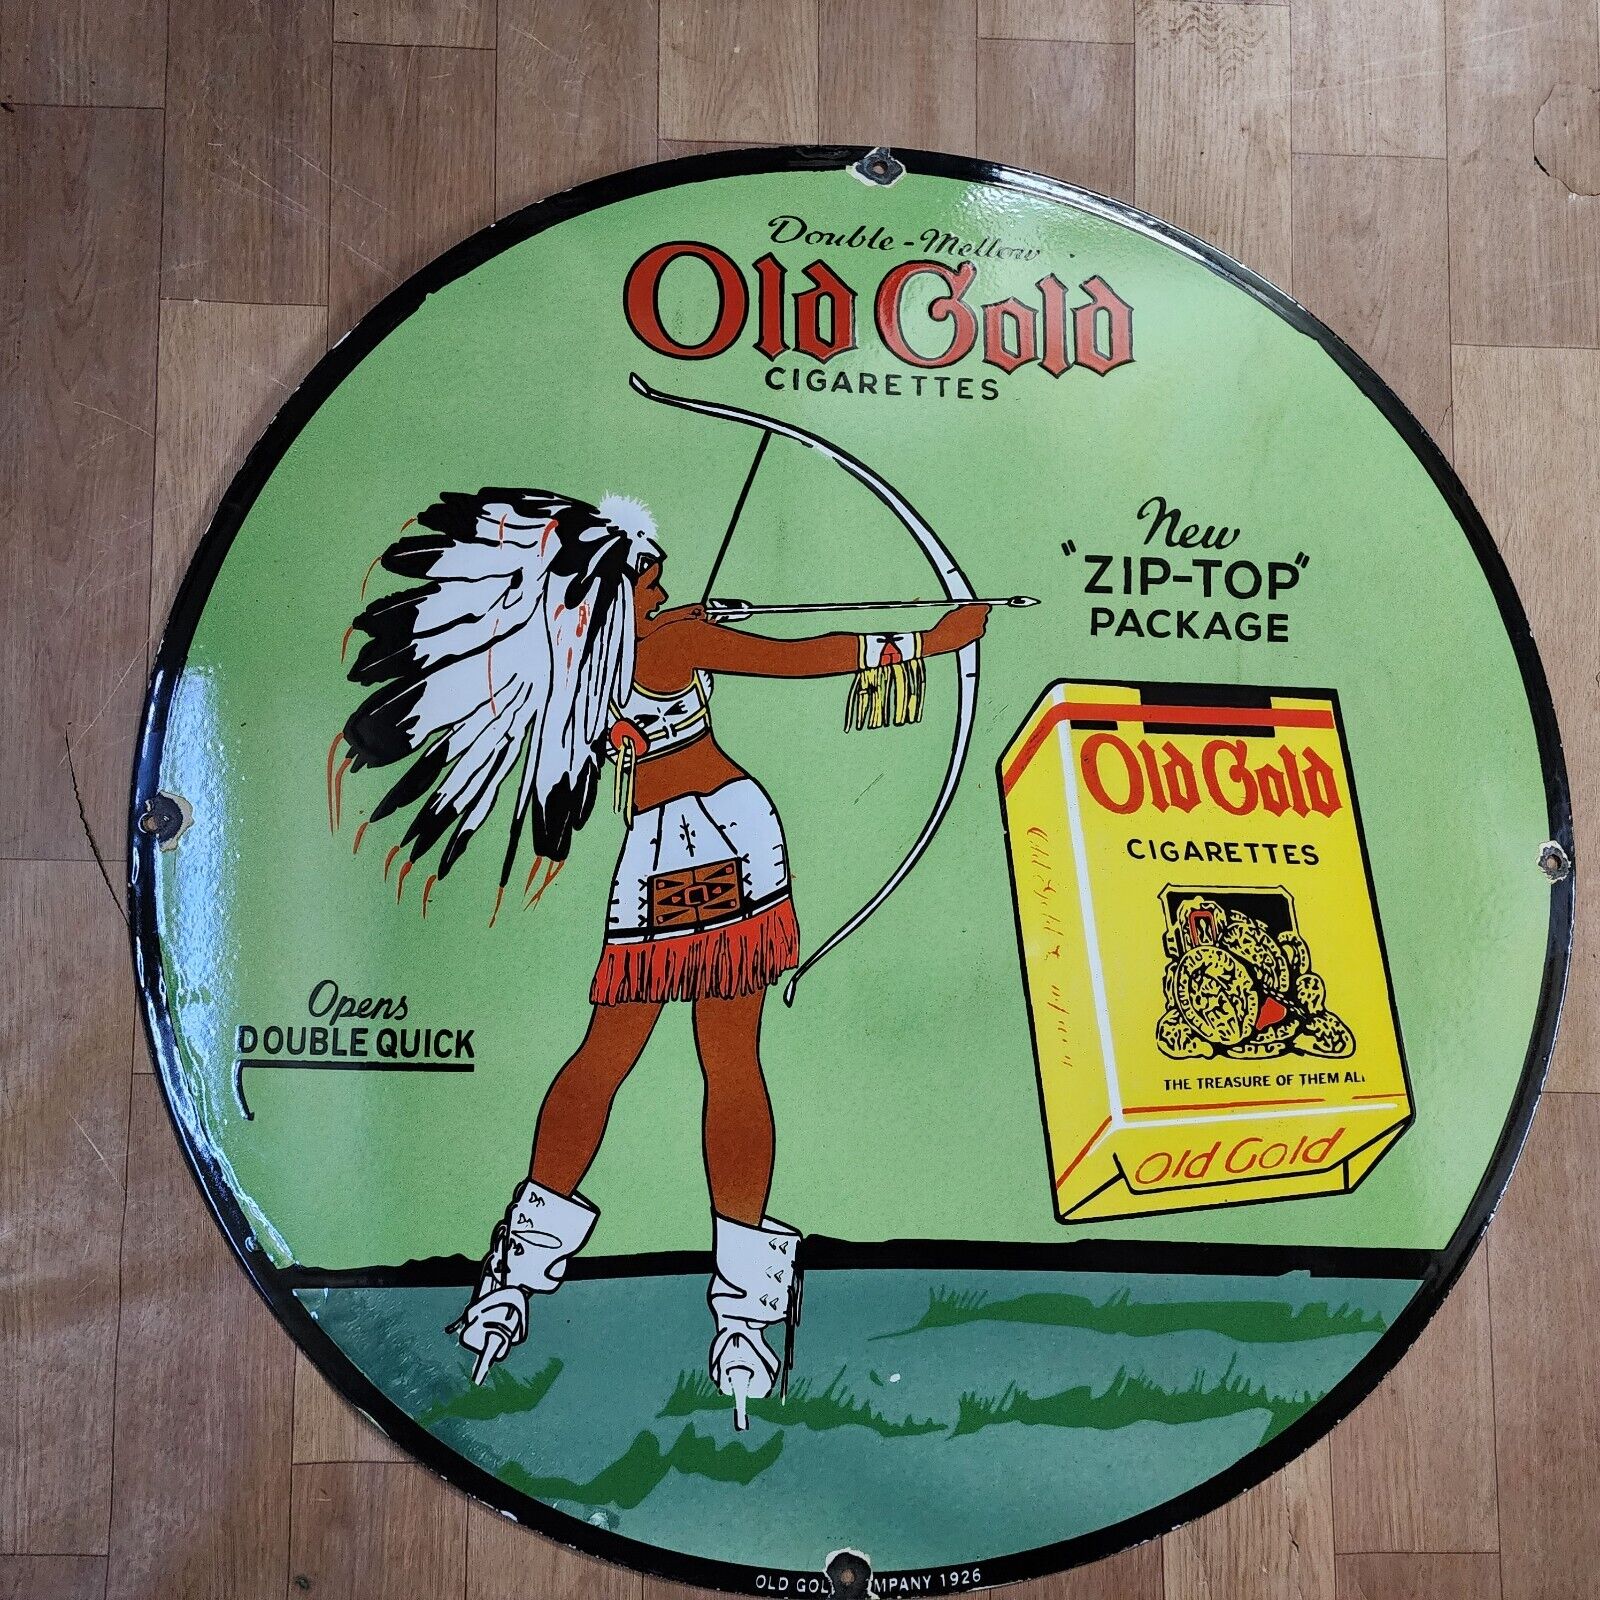 OLD-GOLD PORCELAIN ENAMEL SIGN 30 INCHES ROUND